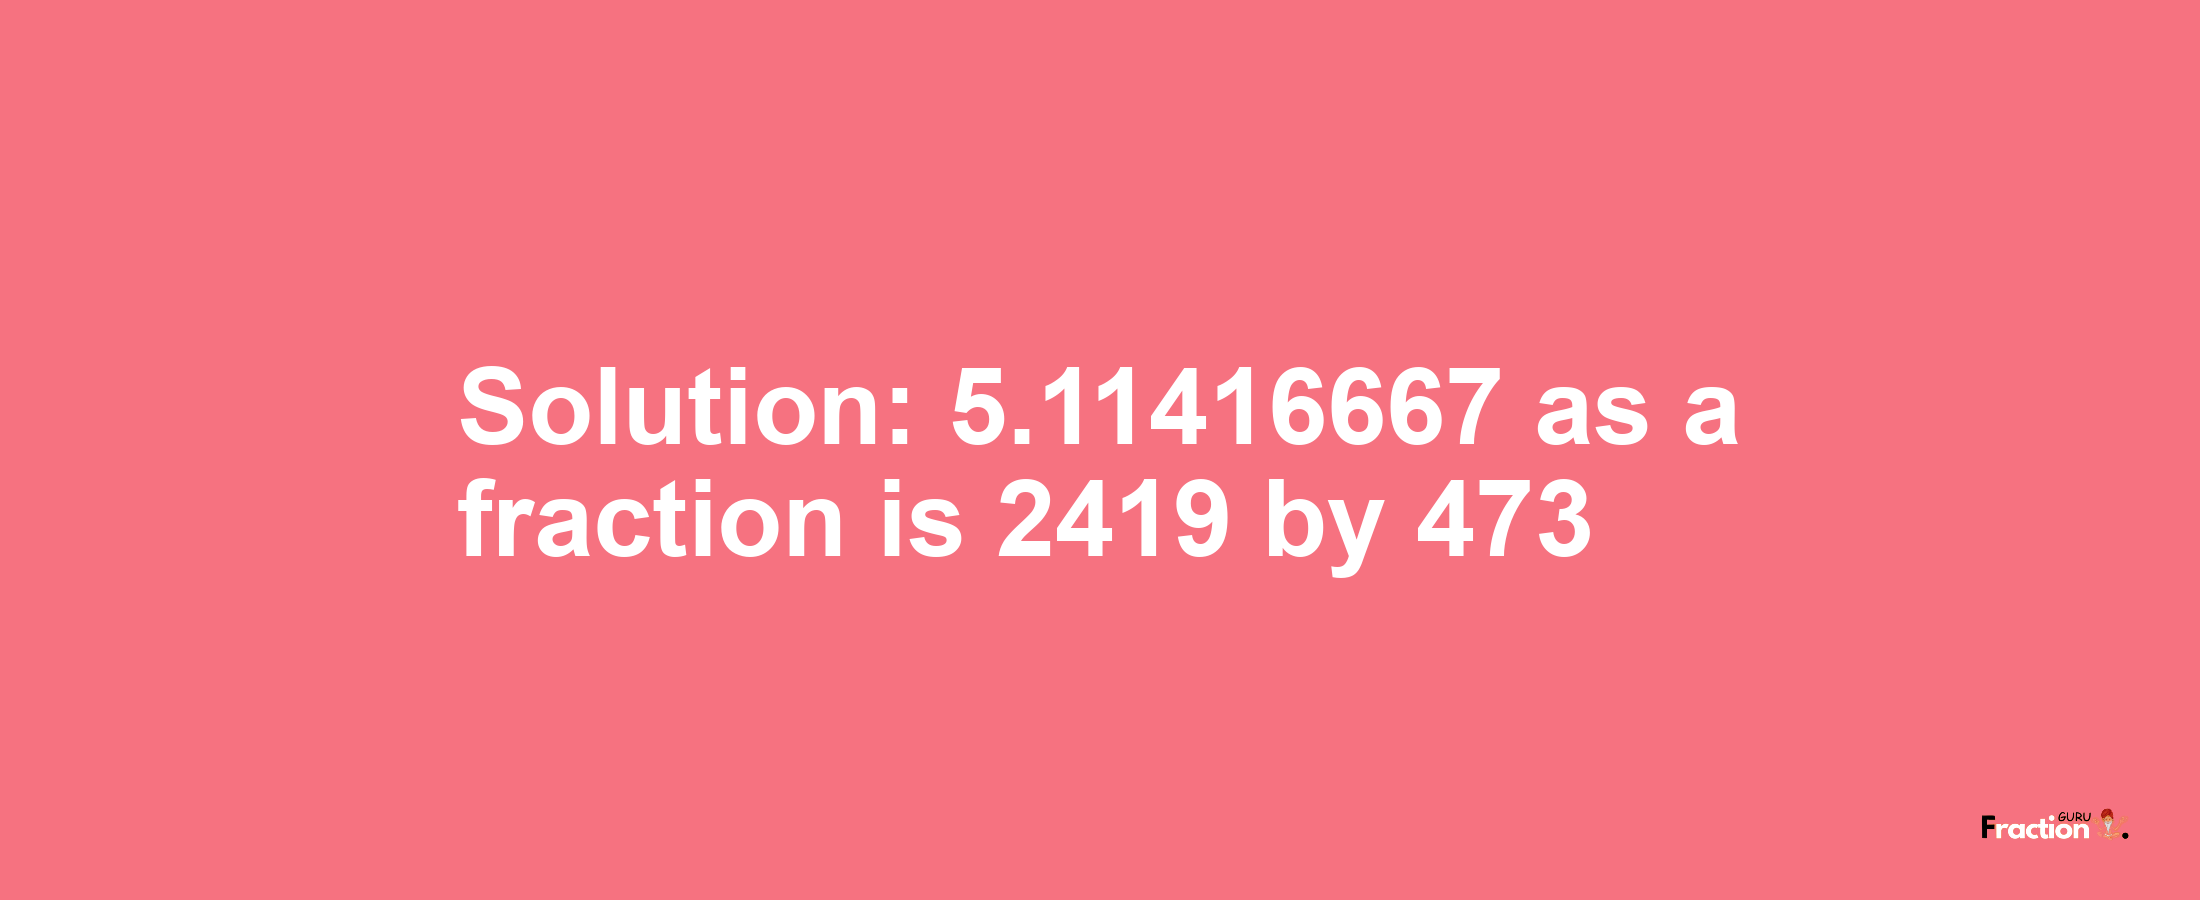 Solution:5.11416667 as a fraction is 2419/473